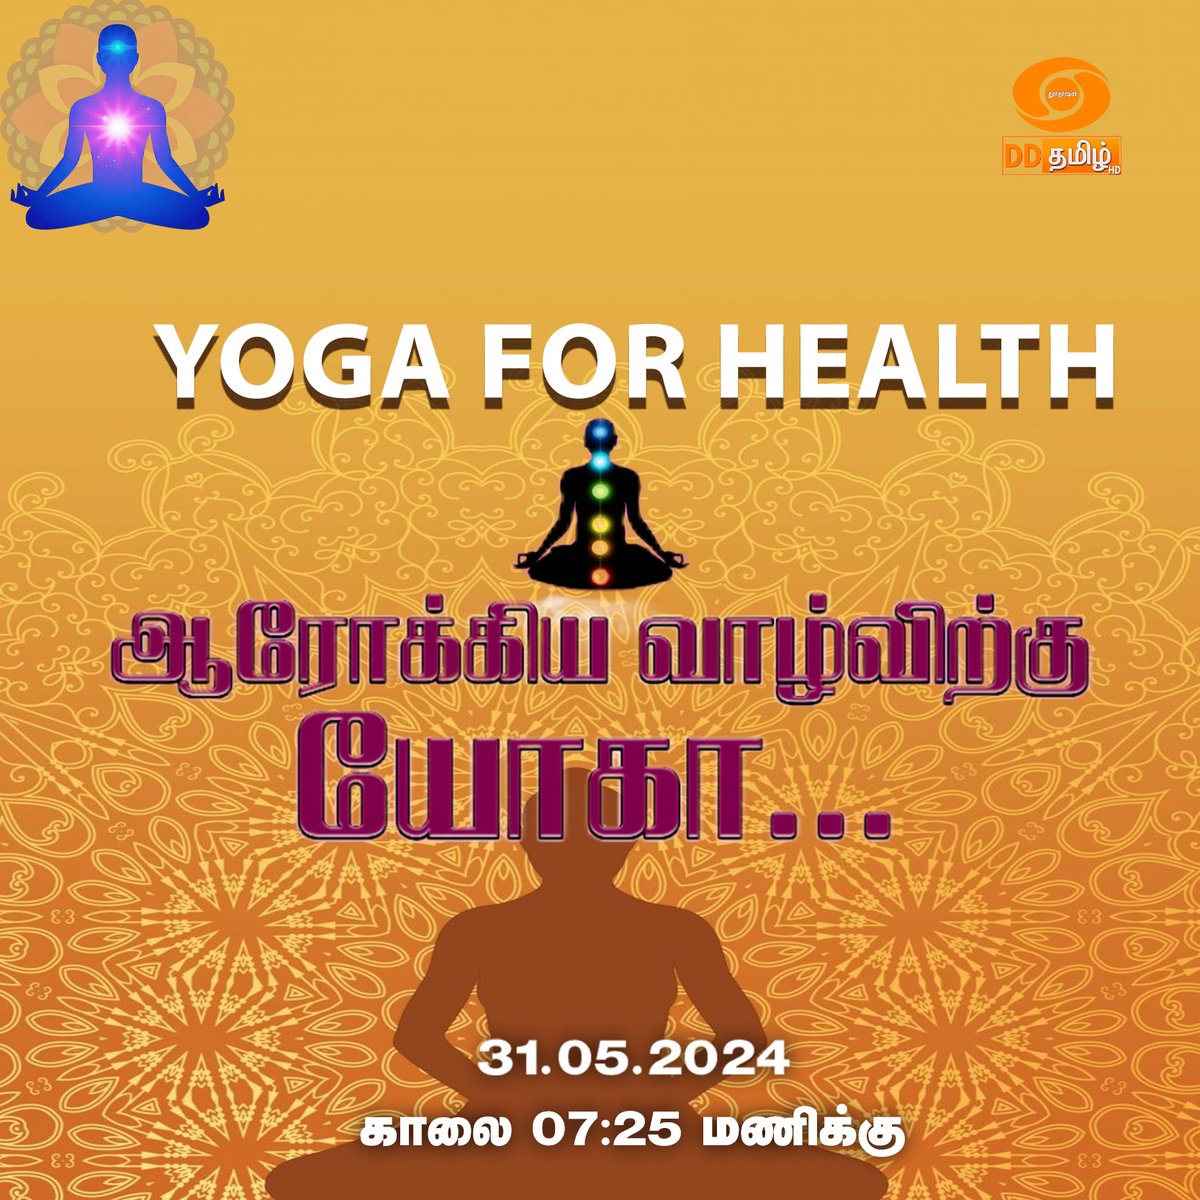 📷 Elevate your mornings with a splash of wellness! 📷 Dive into the serenity of 'Yoga for Health - Arokkiya Vaazhvirkku Yoga' Repeat Telecast on @DDTamilOfficial | daily at the zen o'clock of 7:25 AM
#ArokkiyaVaazhvirkkuYoga #DDtamilYoga #WellnessRituals #morningmantra